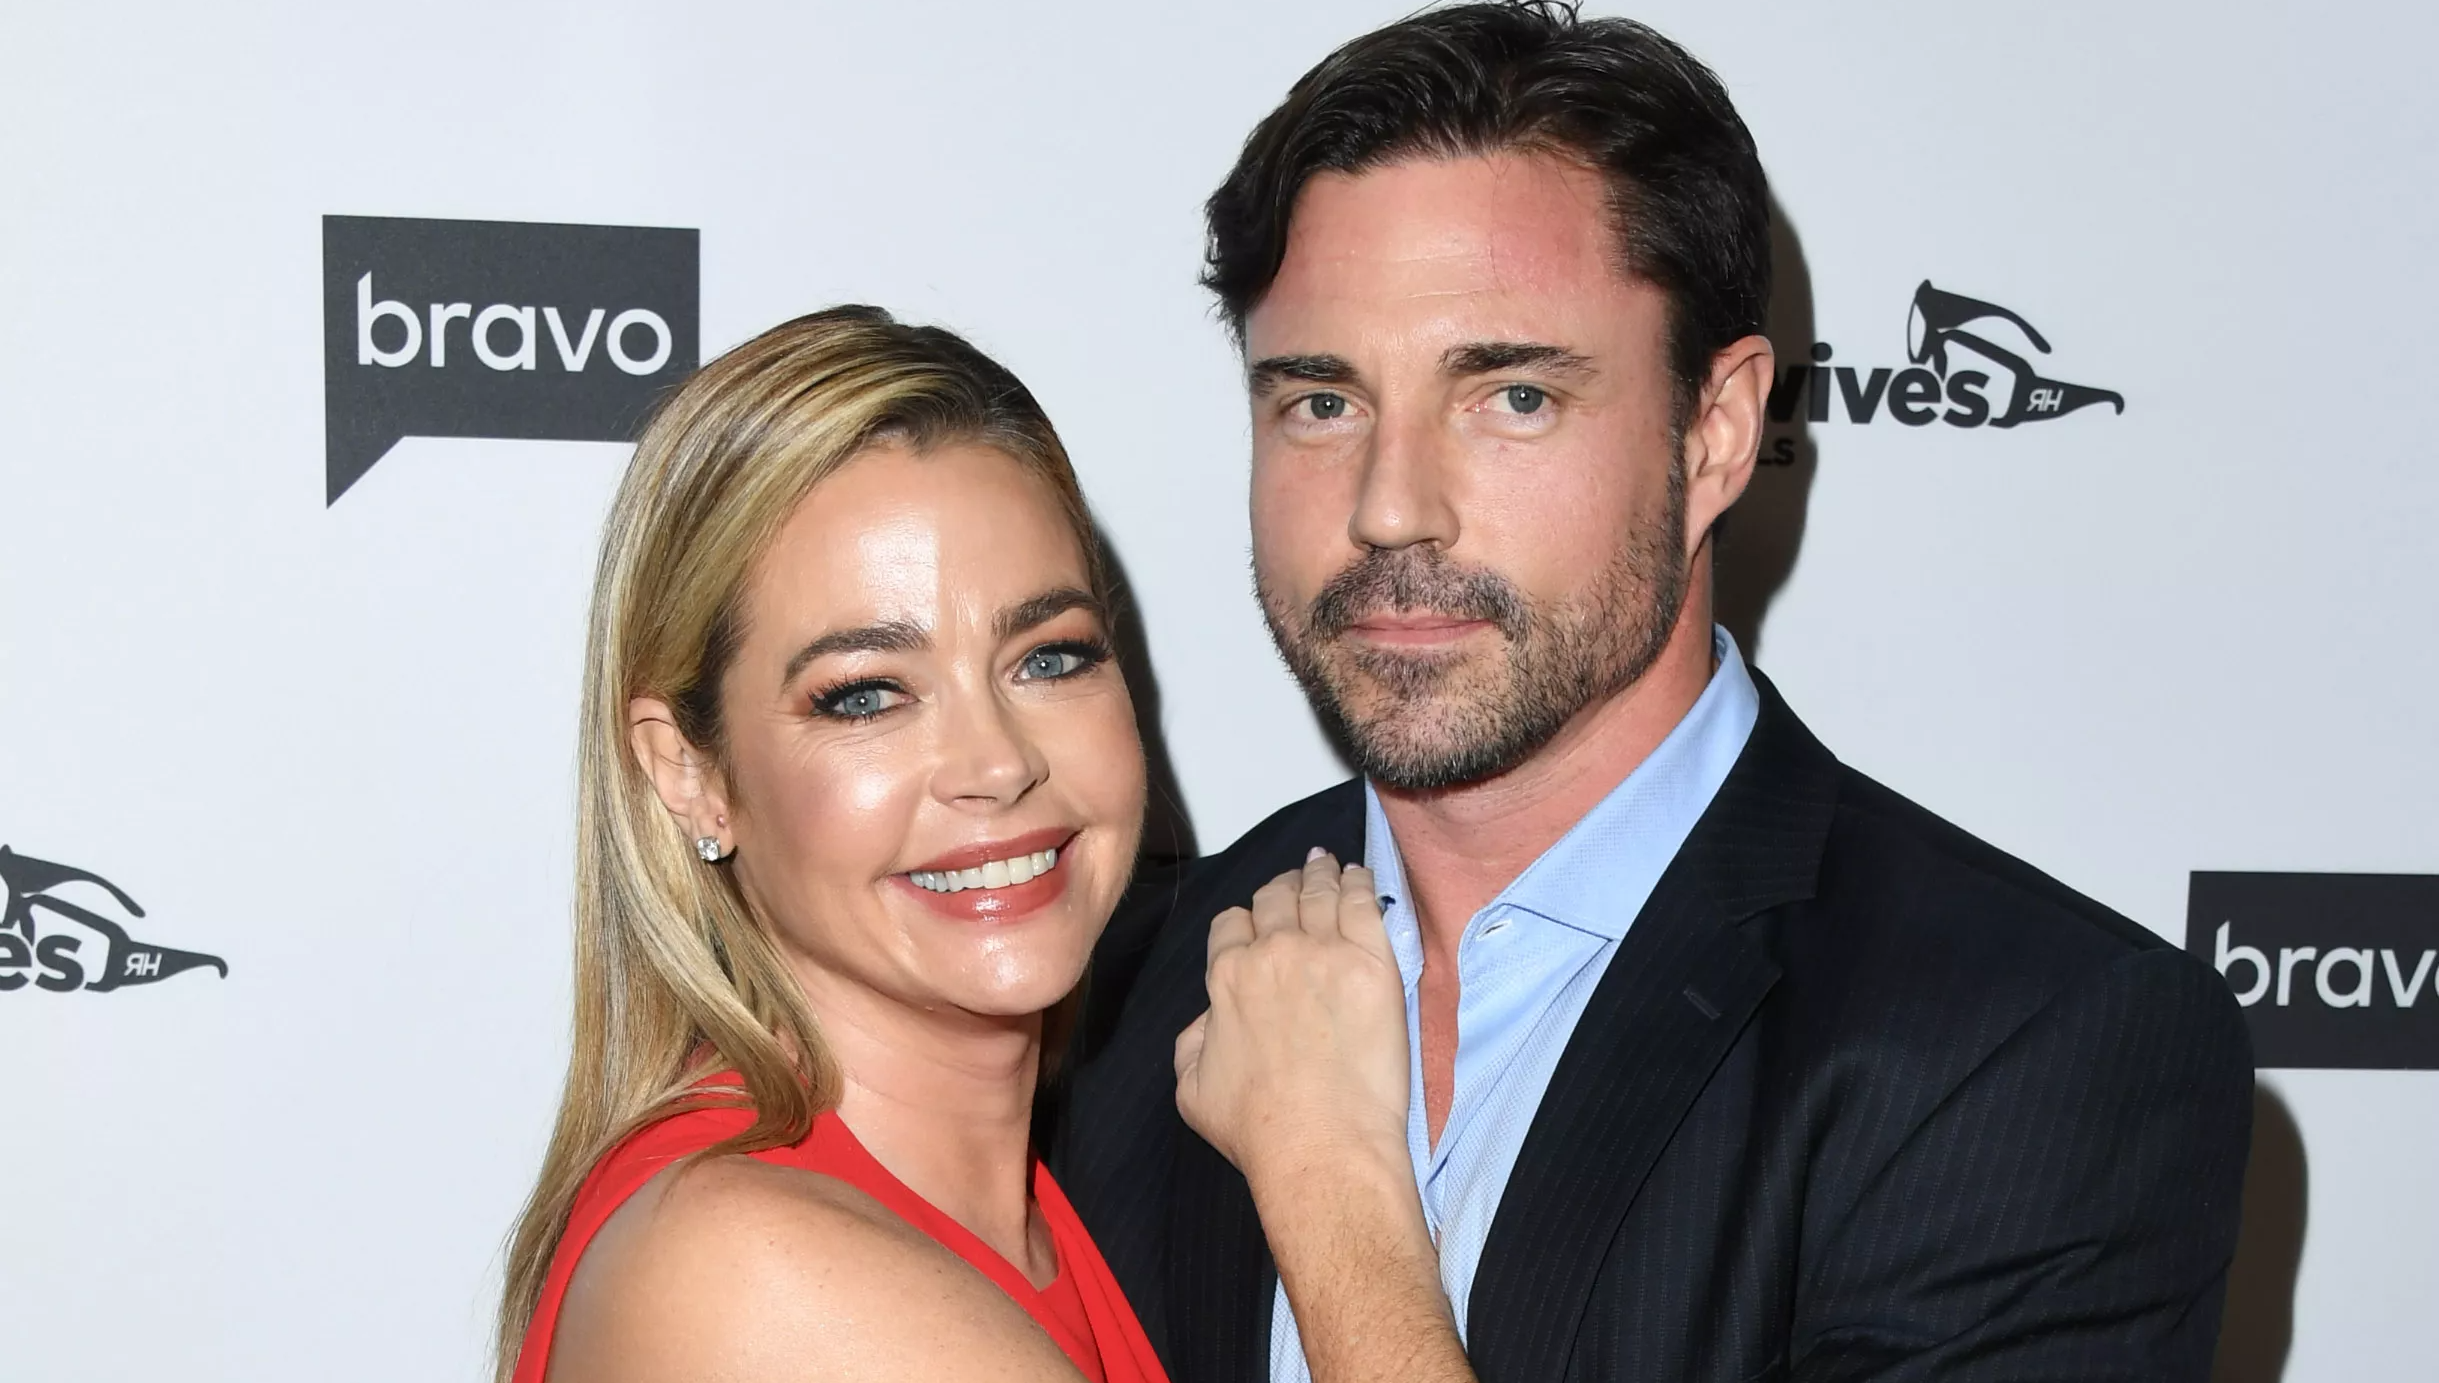 ‘RHOBH’ Denise Richards Shows Loyalty To Husband With Shopping Spree Amid Affair Rumors